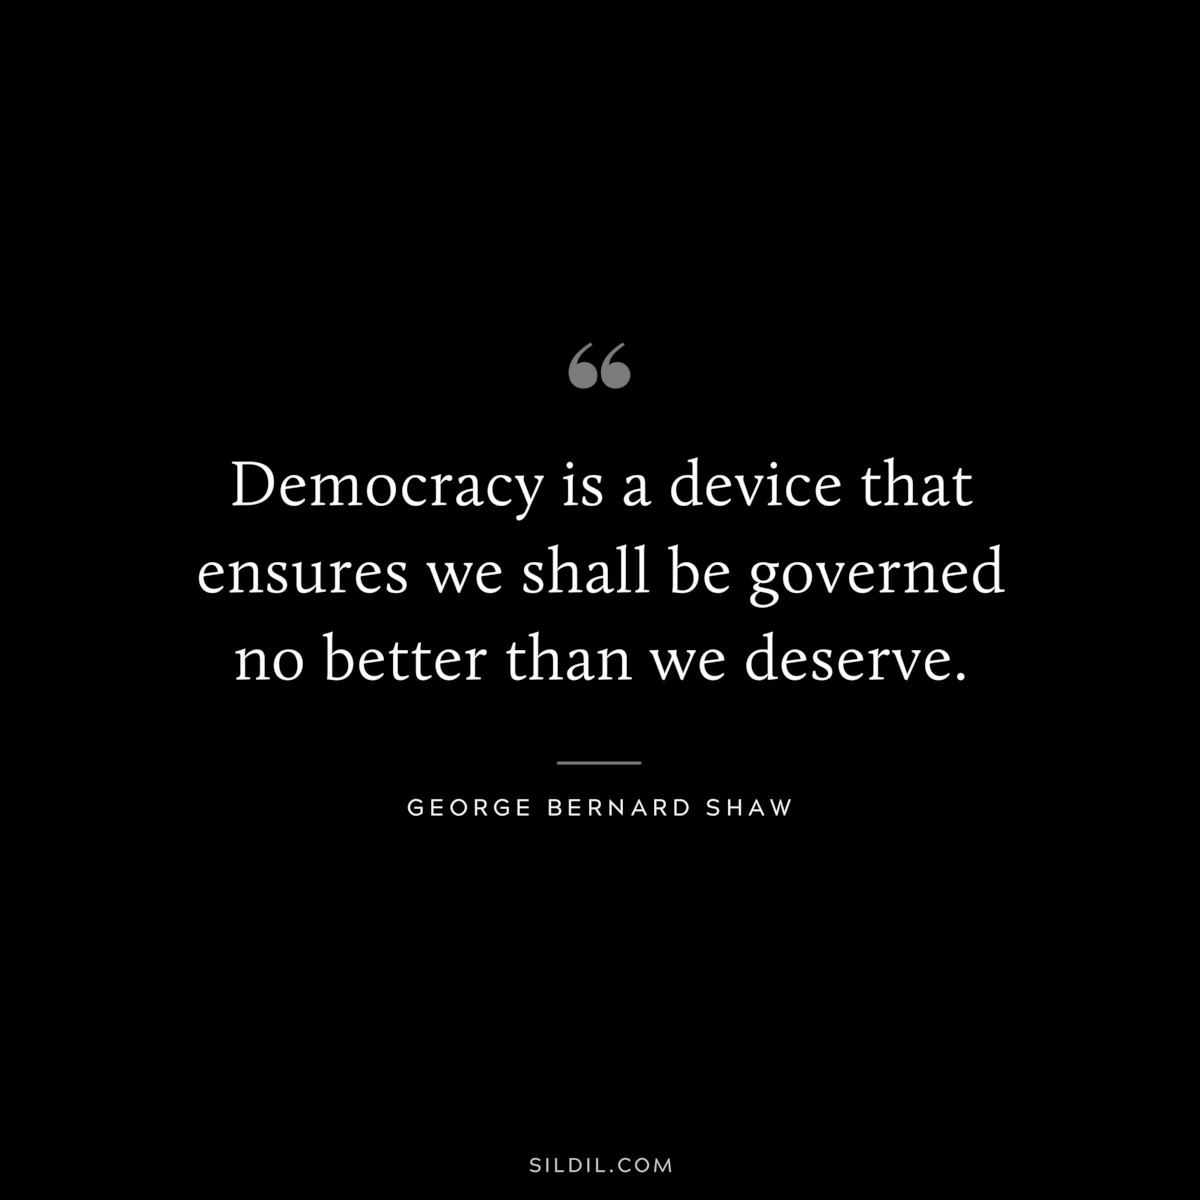 Democracy is a device that ensures we shall be governed no better than we deserve. ― George Bernard Shaw